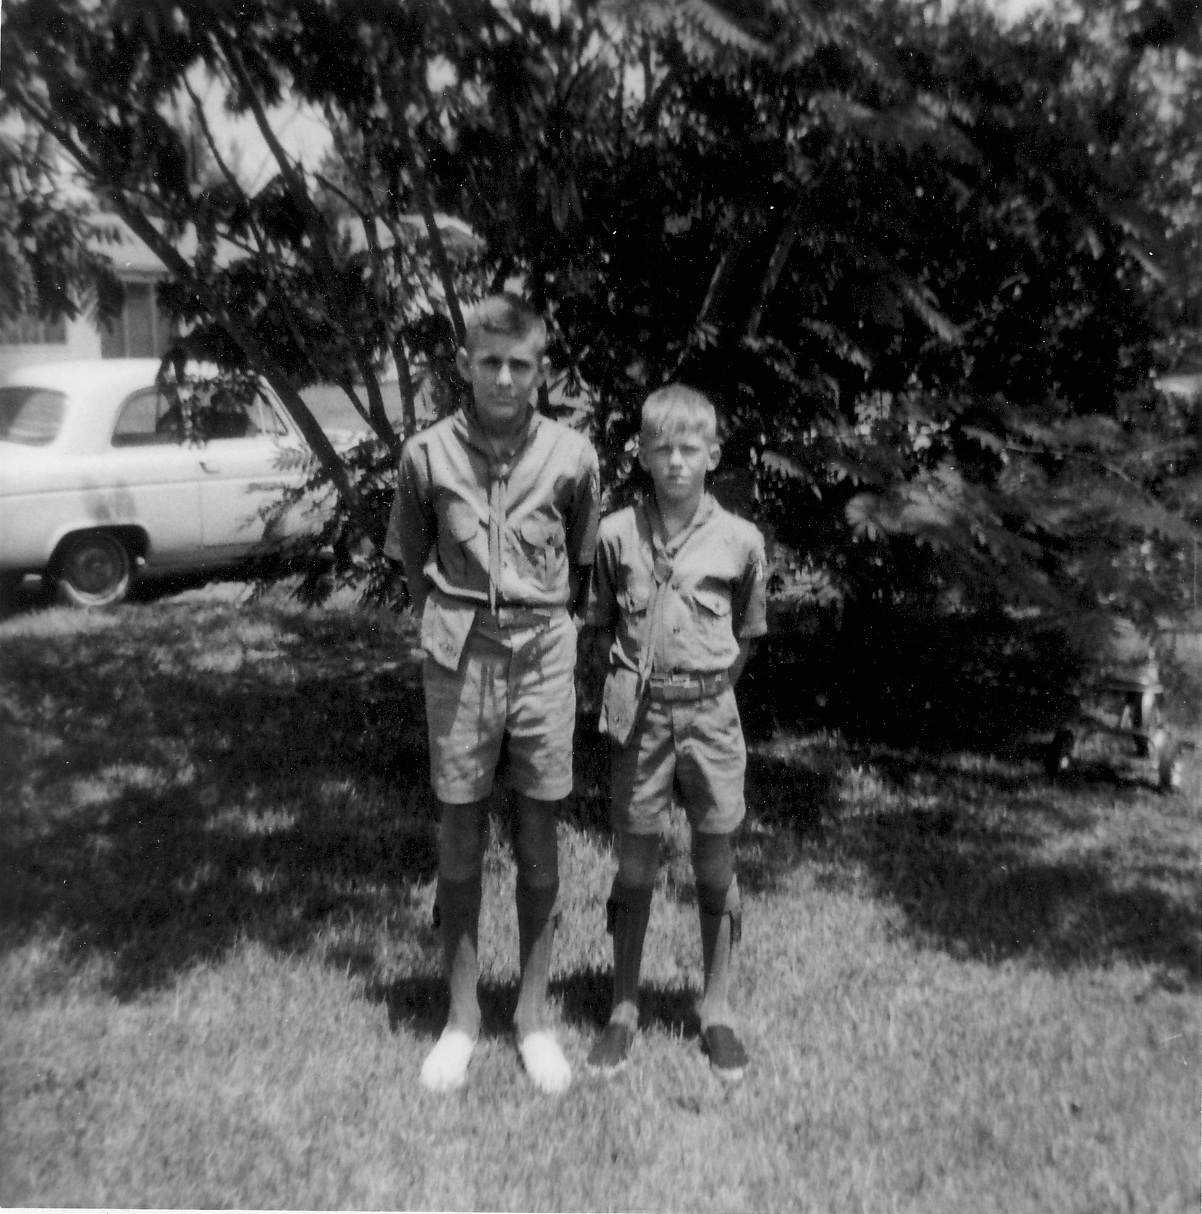 Larry and David in Boy Scout uniforms